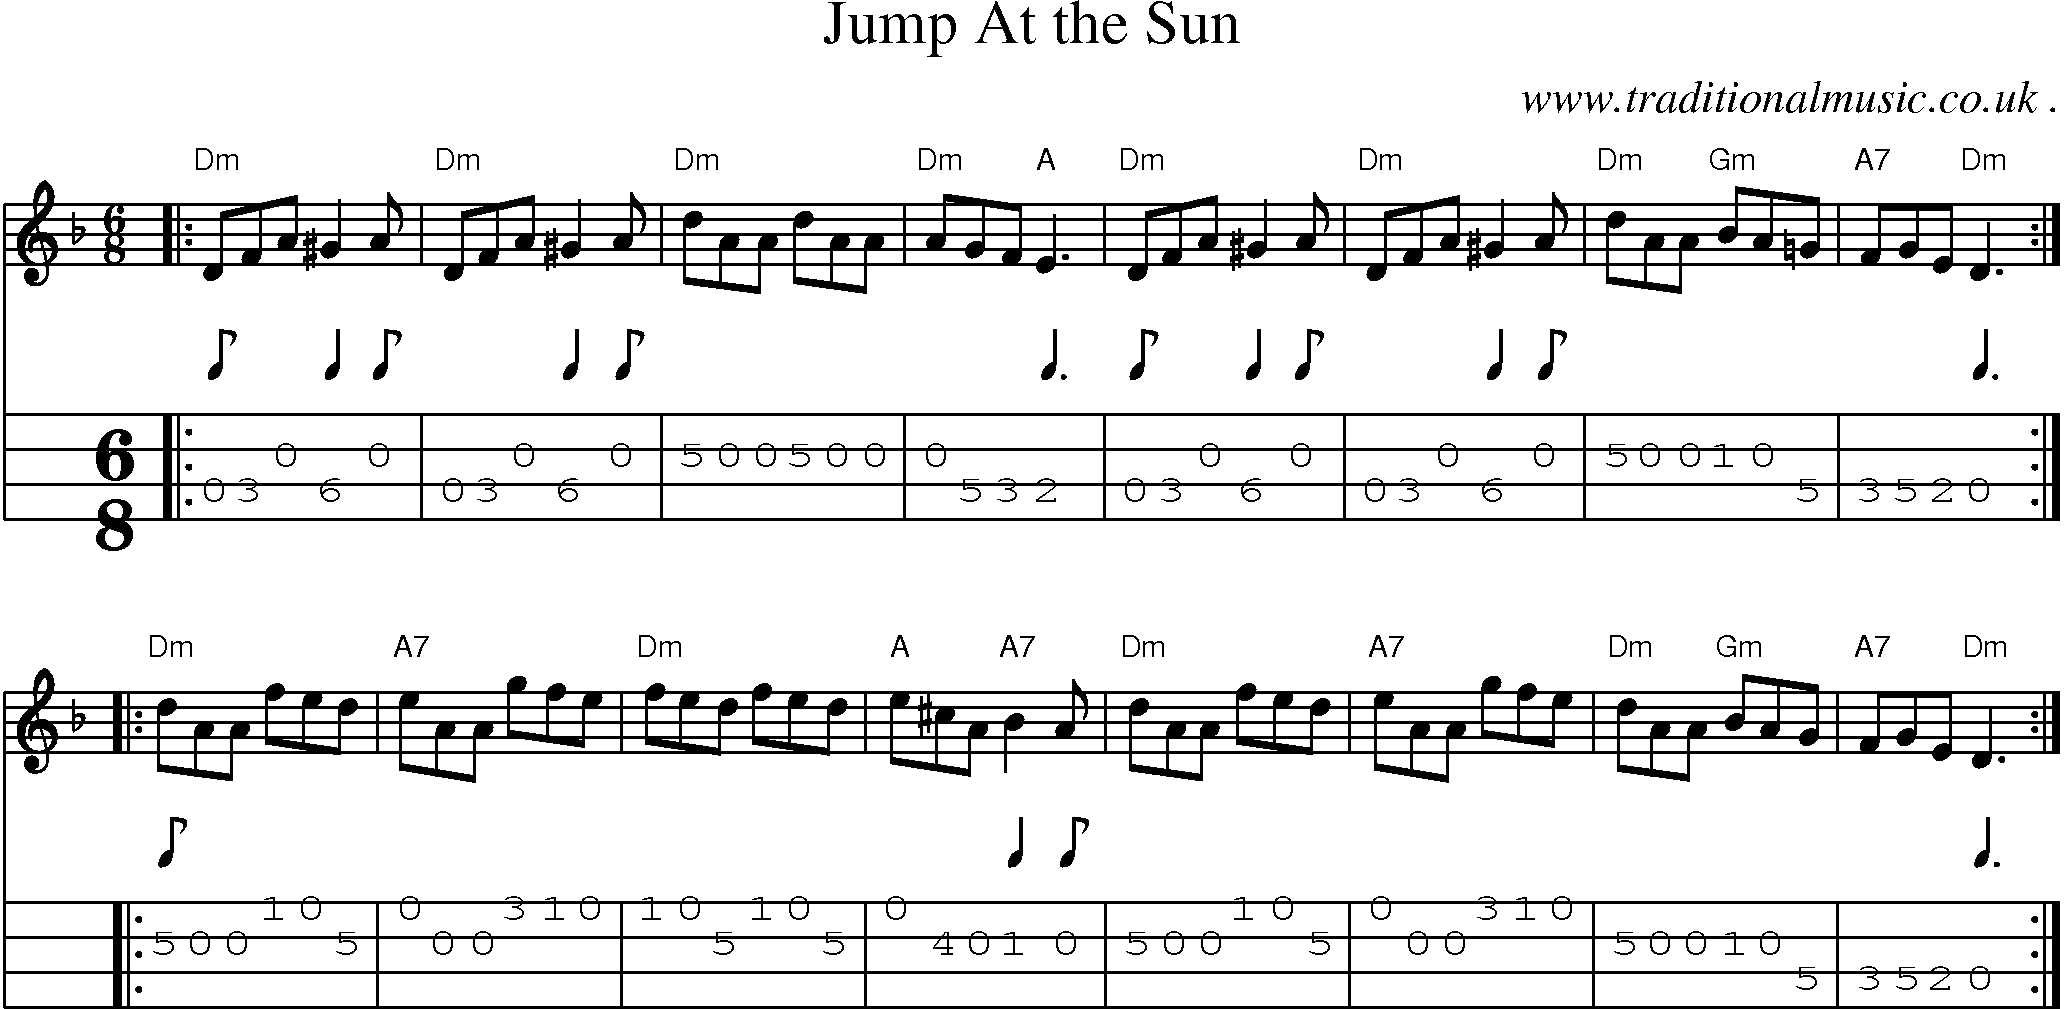 Sheet-music  score, Chords and Mandolin Tabs for Jump At The Sun